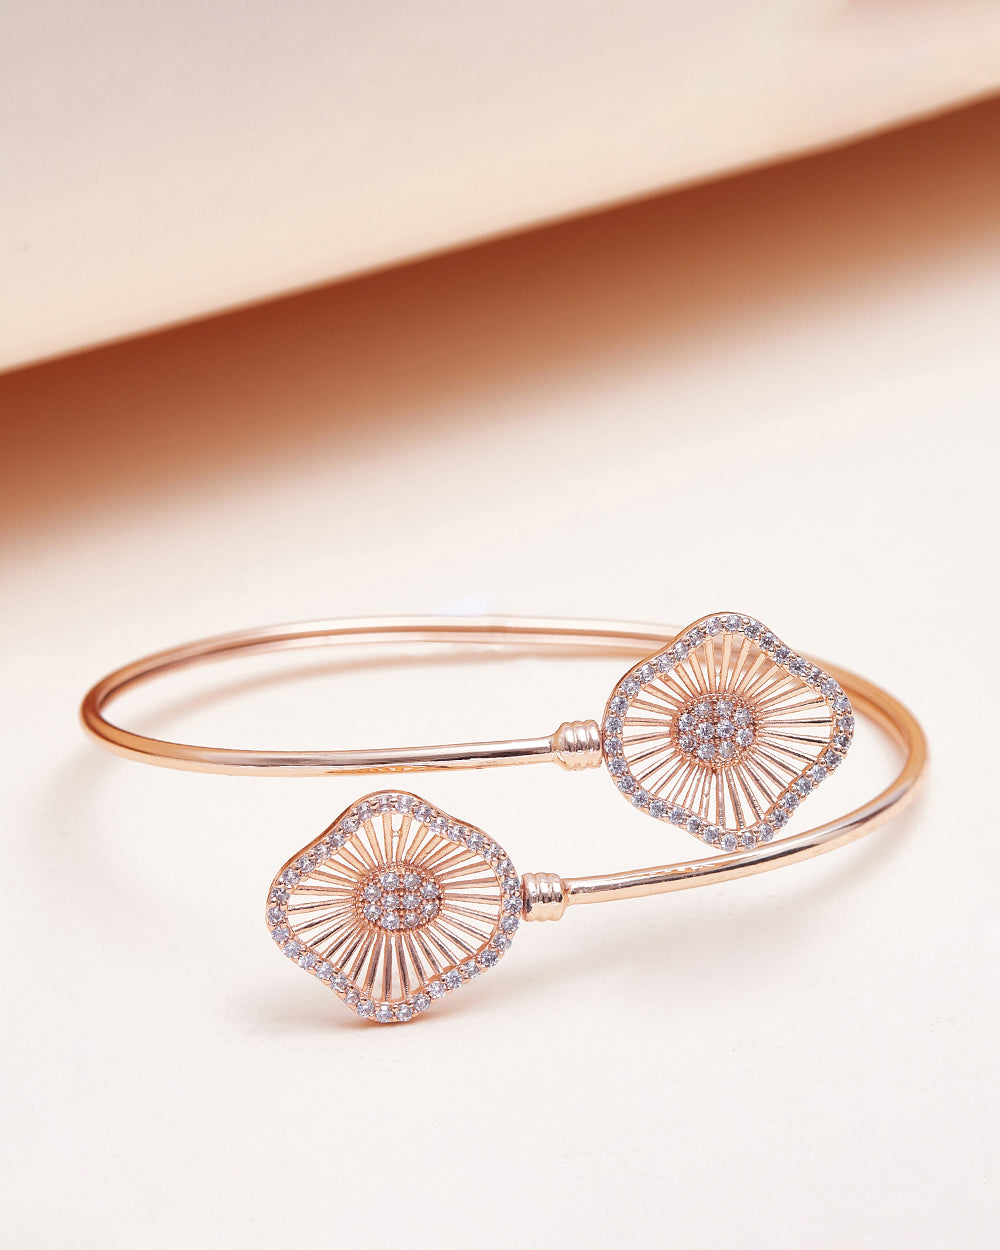 Women's Rose Gold Finish Bracelet With Double Motifs From Elegance Collection - Voylla